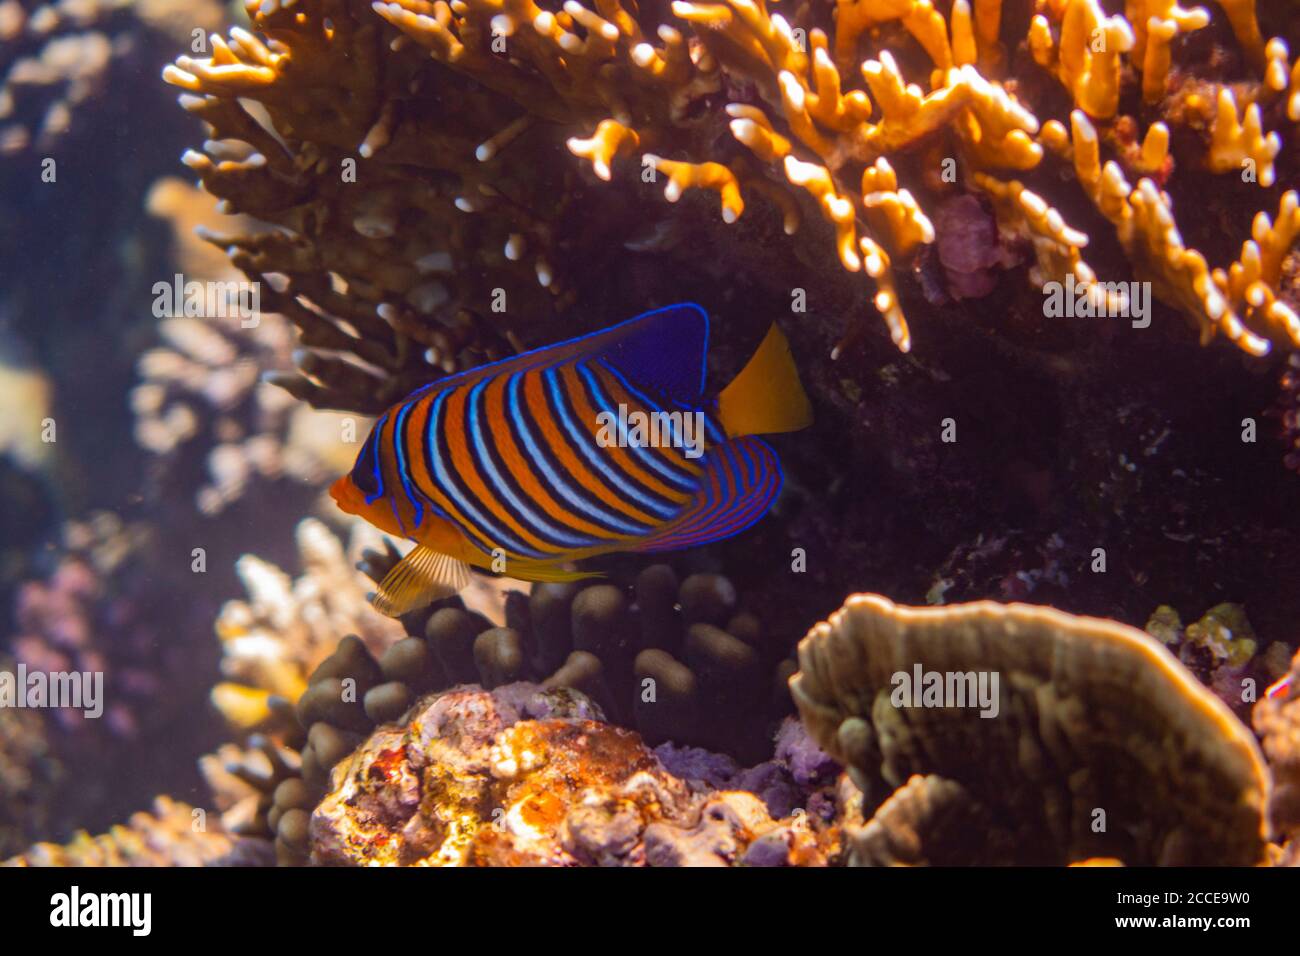 Pygoplites diacanthus, Egypt, Red Sea, Marsa Alam, Africa, Snorkeling and Diving Stock Photo